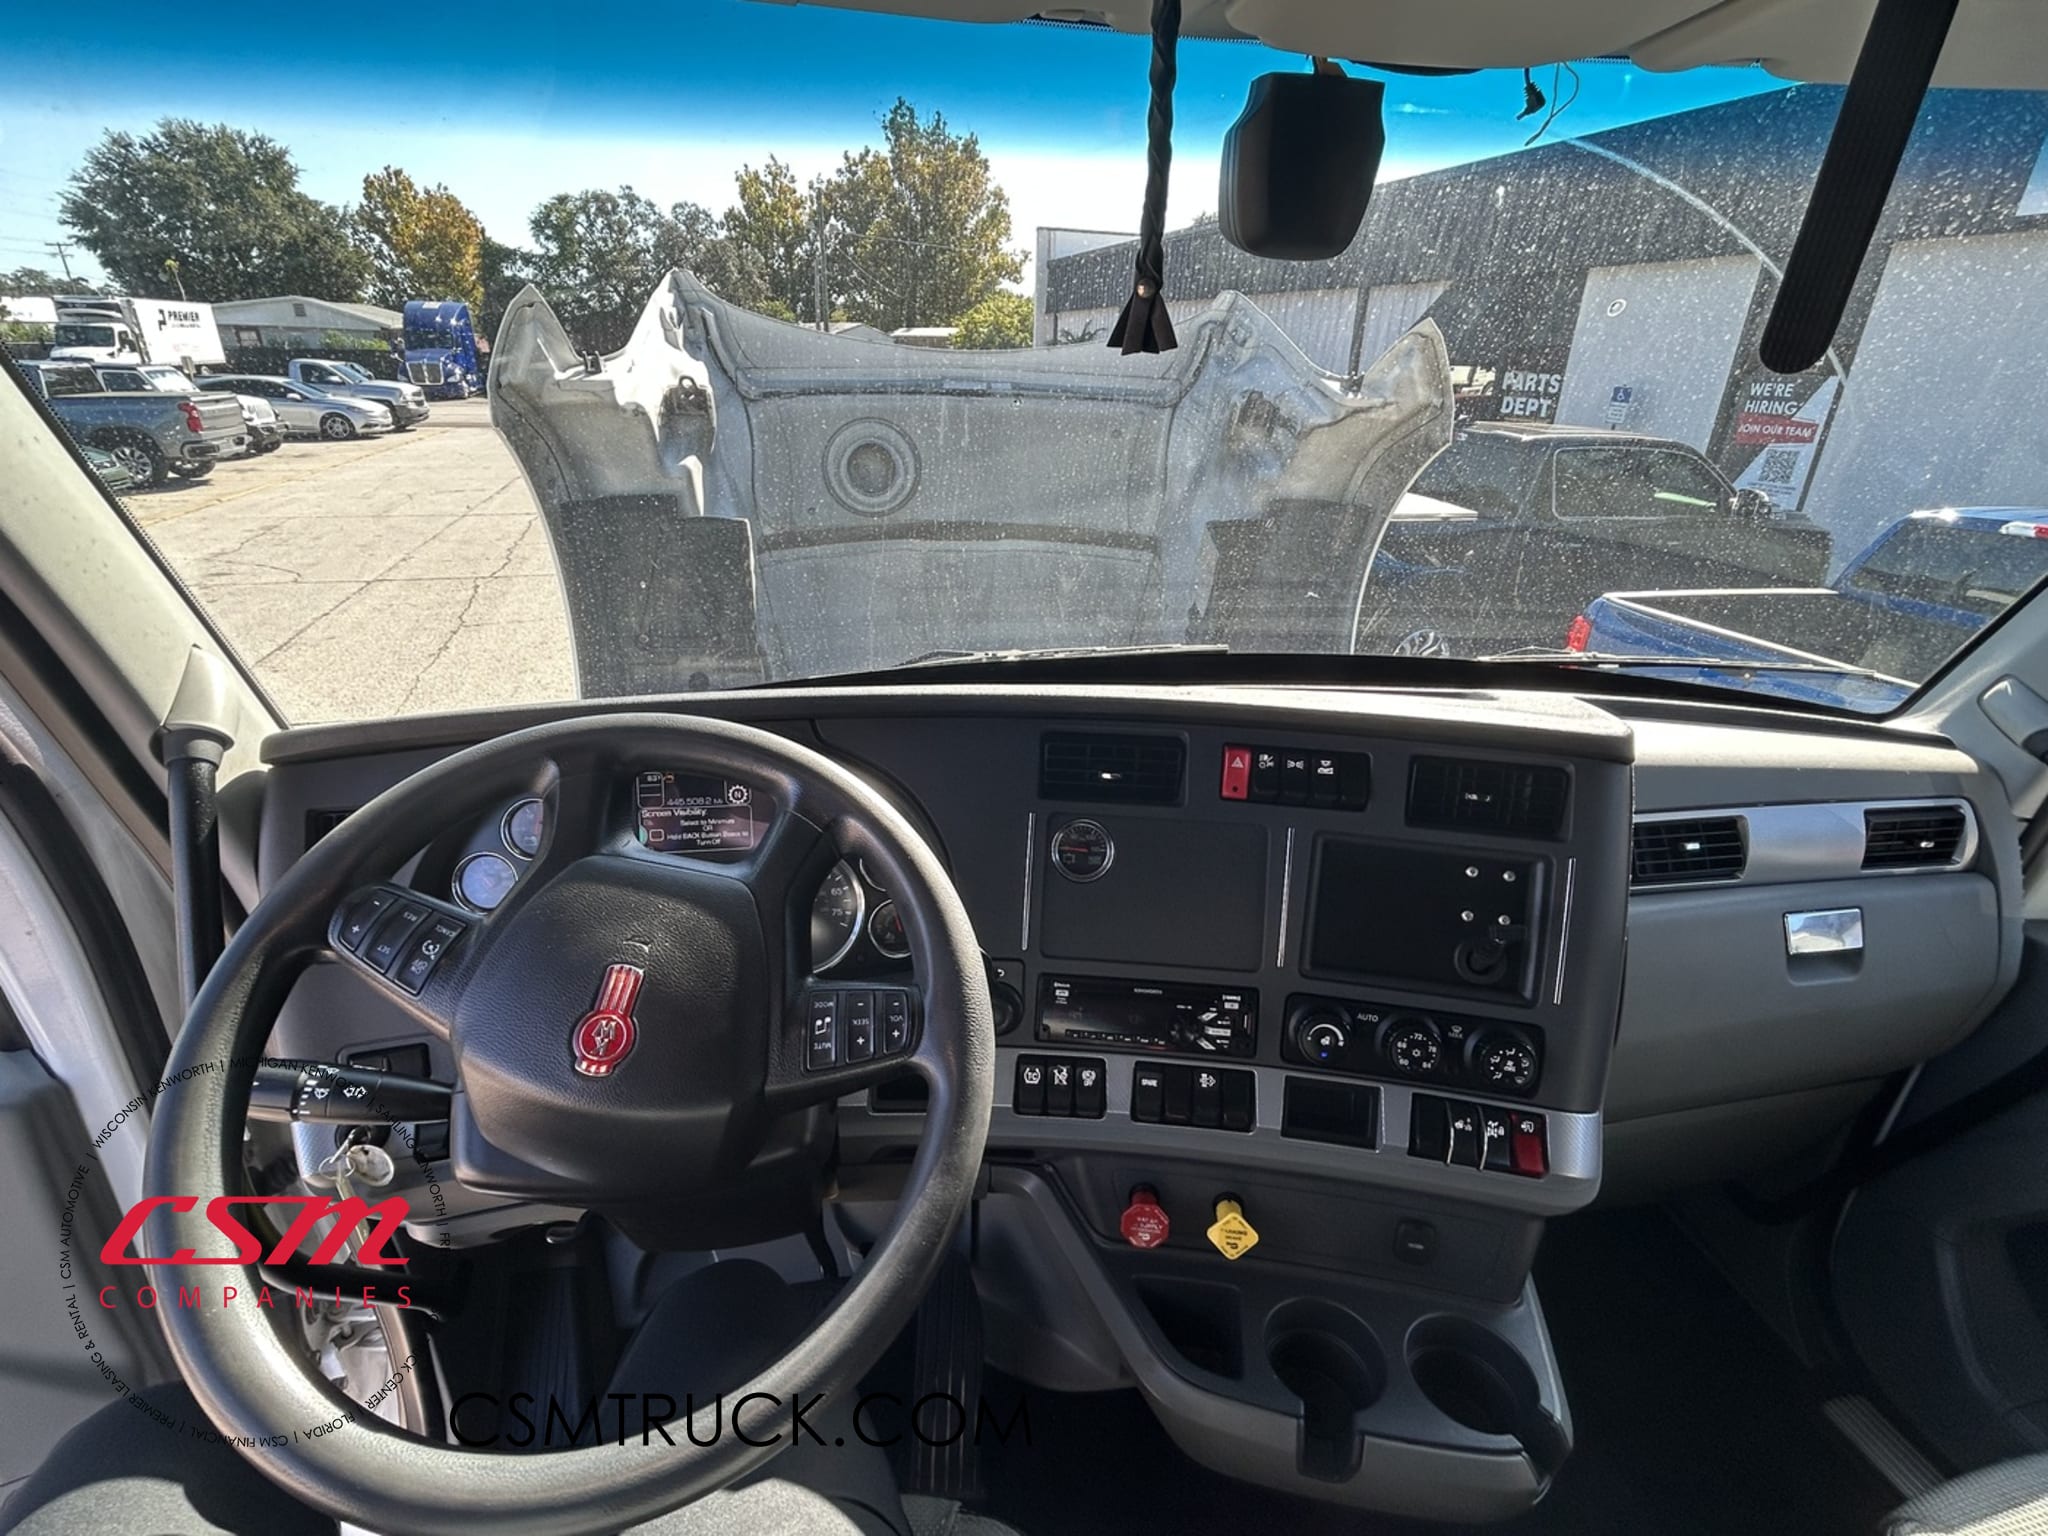 Interior dash for this 2020 Kenworth T680 (Stock number: ULJ354471)